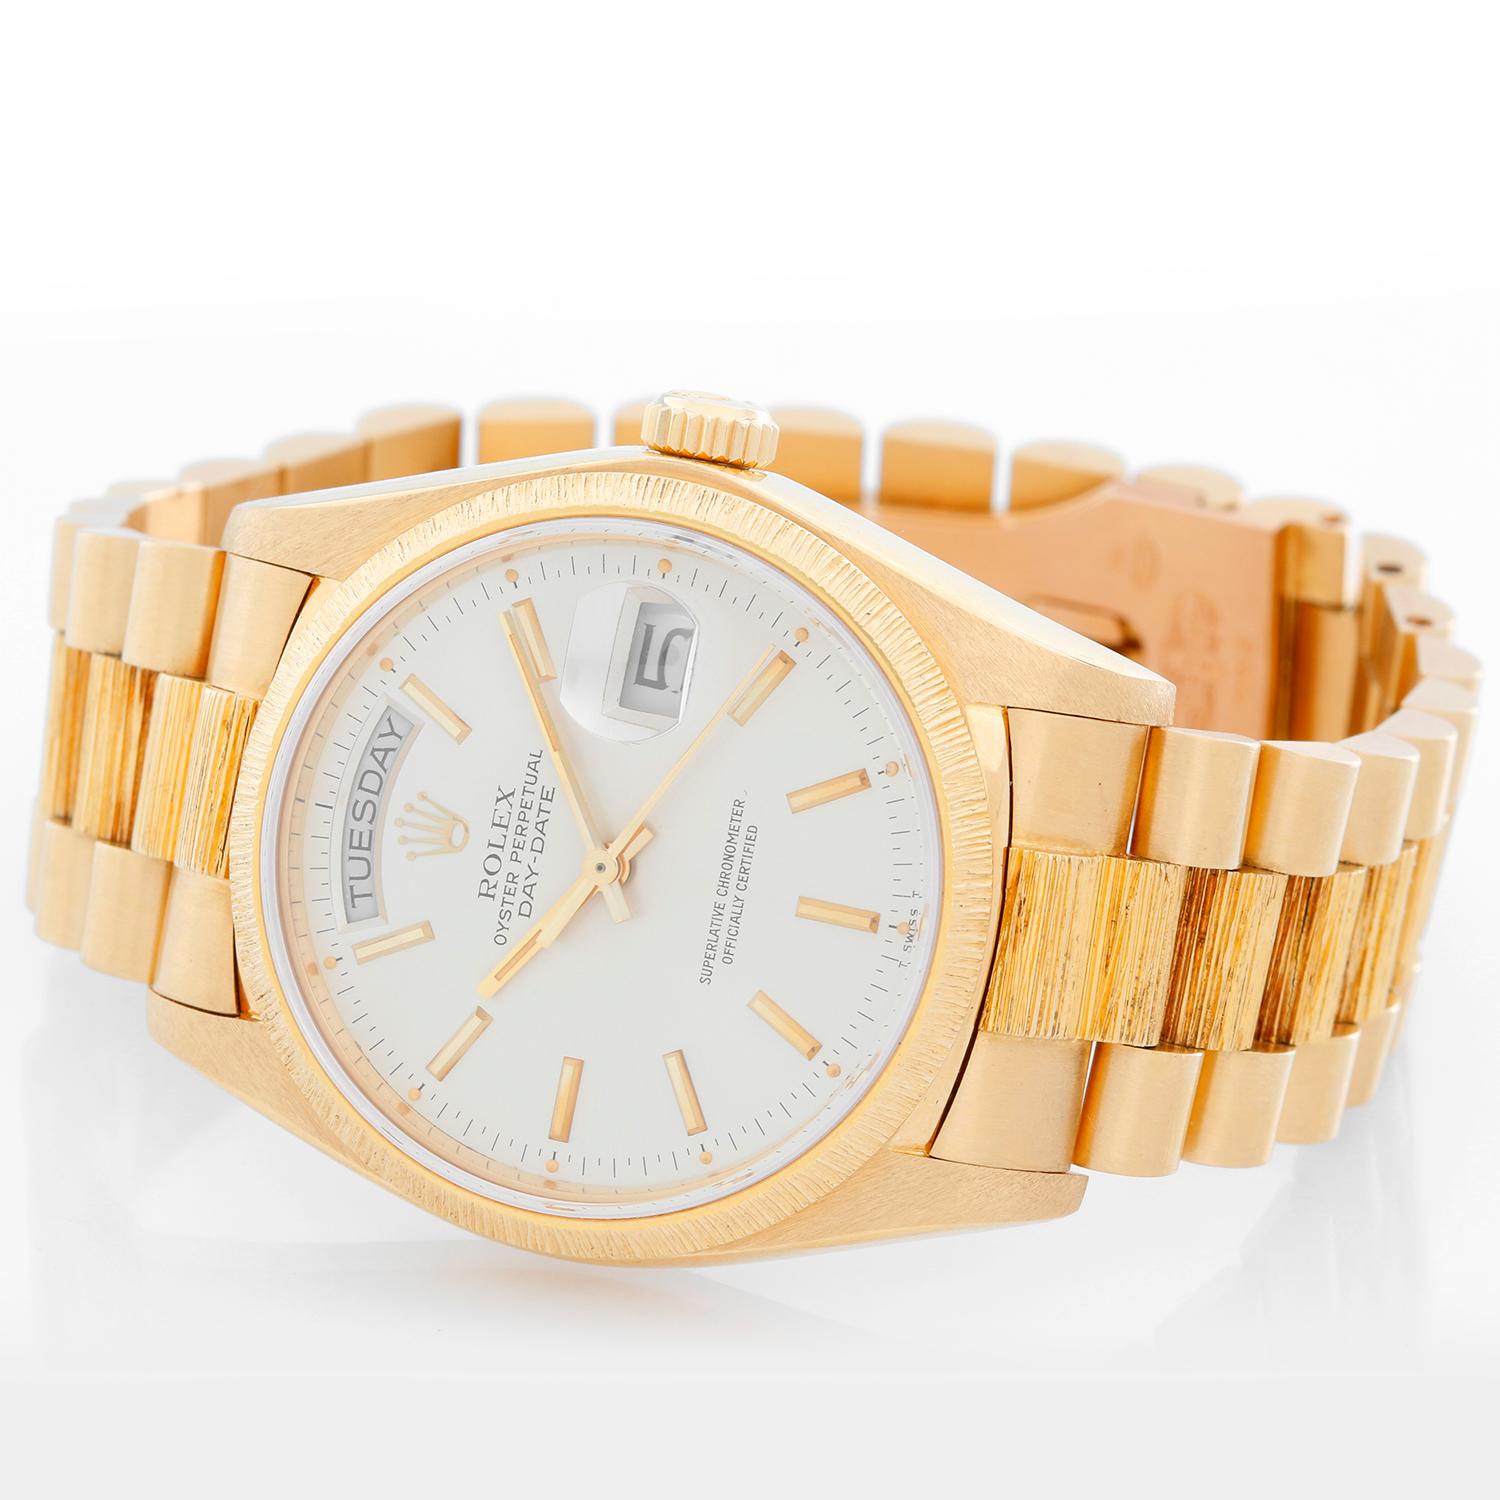 Rolex President Day-Date 18k Yellow Gold Bark Finish Men's Watch 18078 - Automatic winding with day and date. 18k yellow gold case with bark finished bezel (36mm diameter). Silver dial with stick hour markers. 18k yellow gold President bracelet with